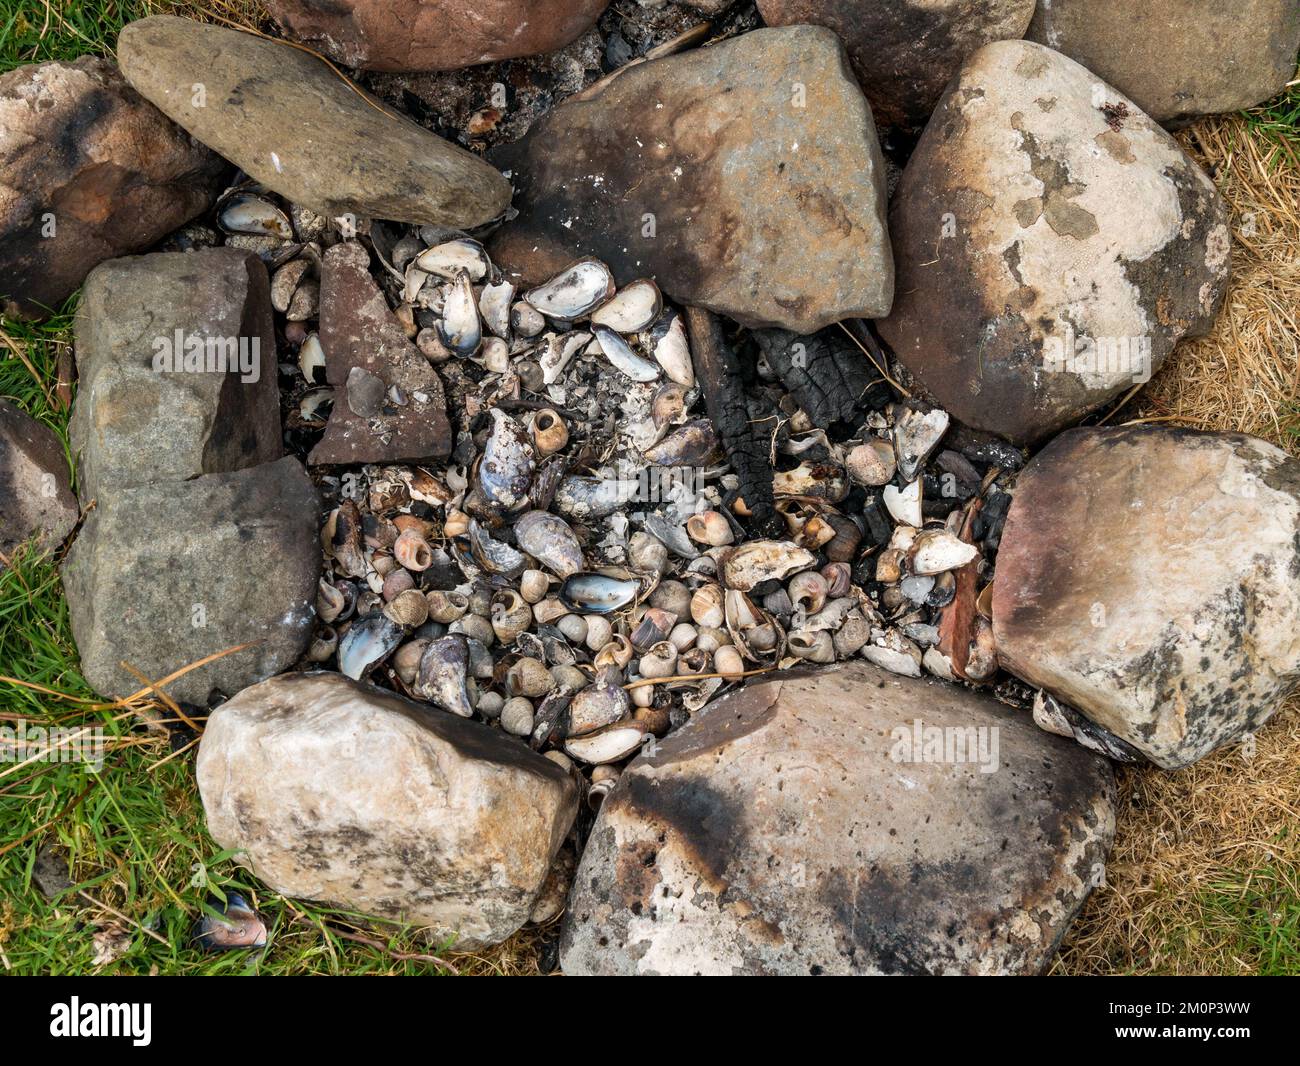 Remains of shellfish beach barbecue site with ring of stones for a hearth containing ashes and empty mussel and winkle shells, Scotland, UK Stock Photo